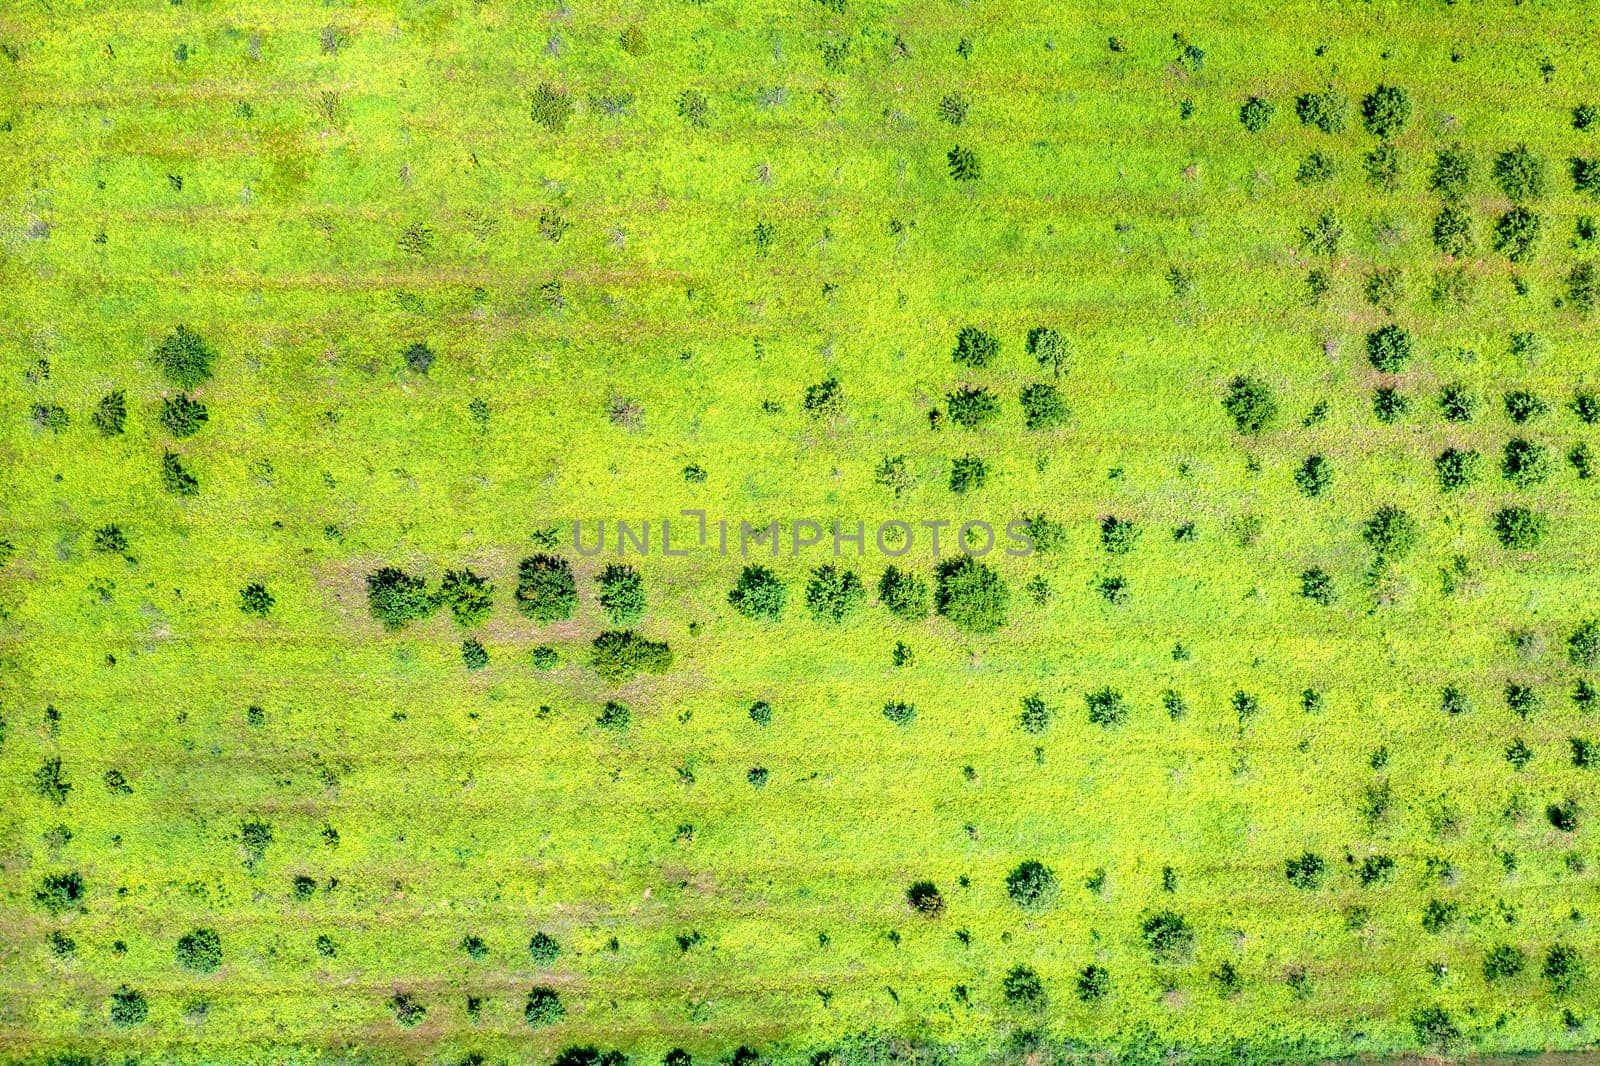 Abstract aerial view of a field with some trees